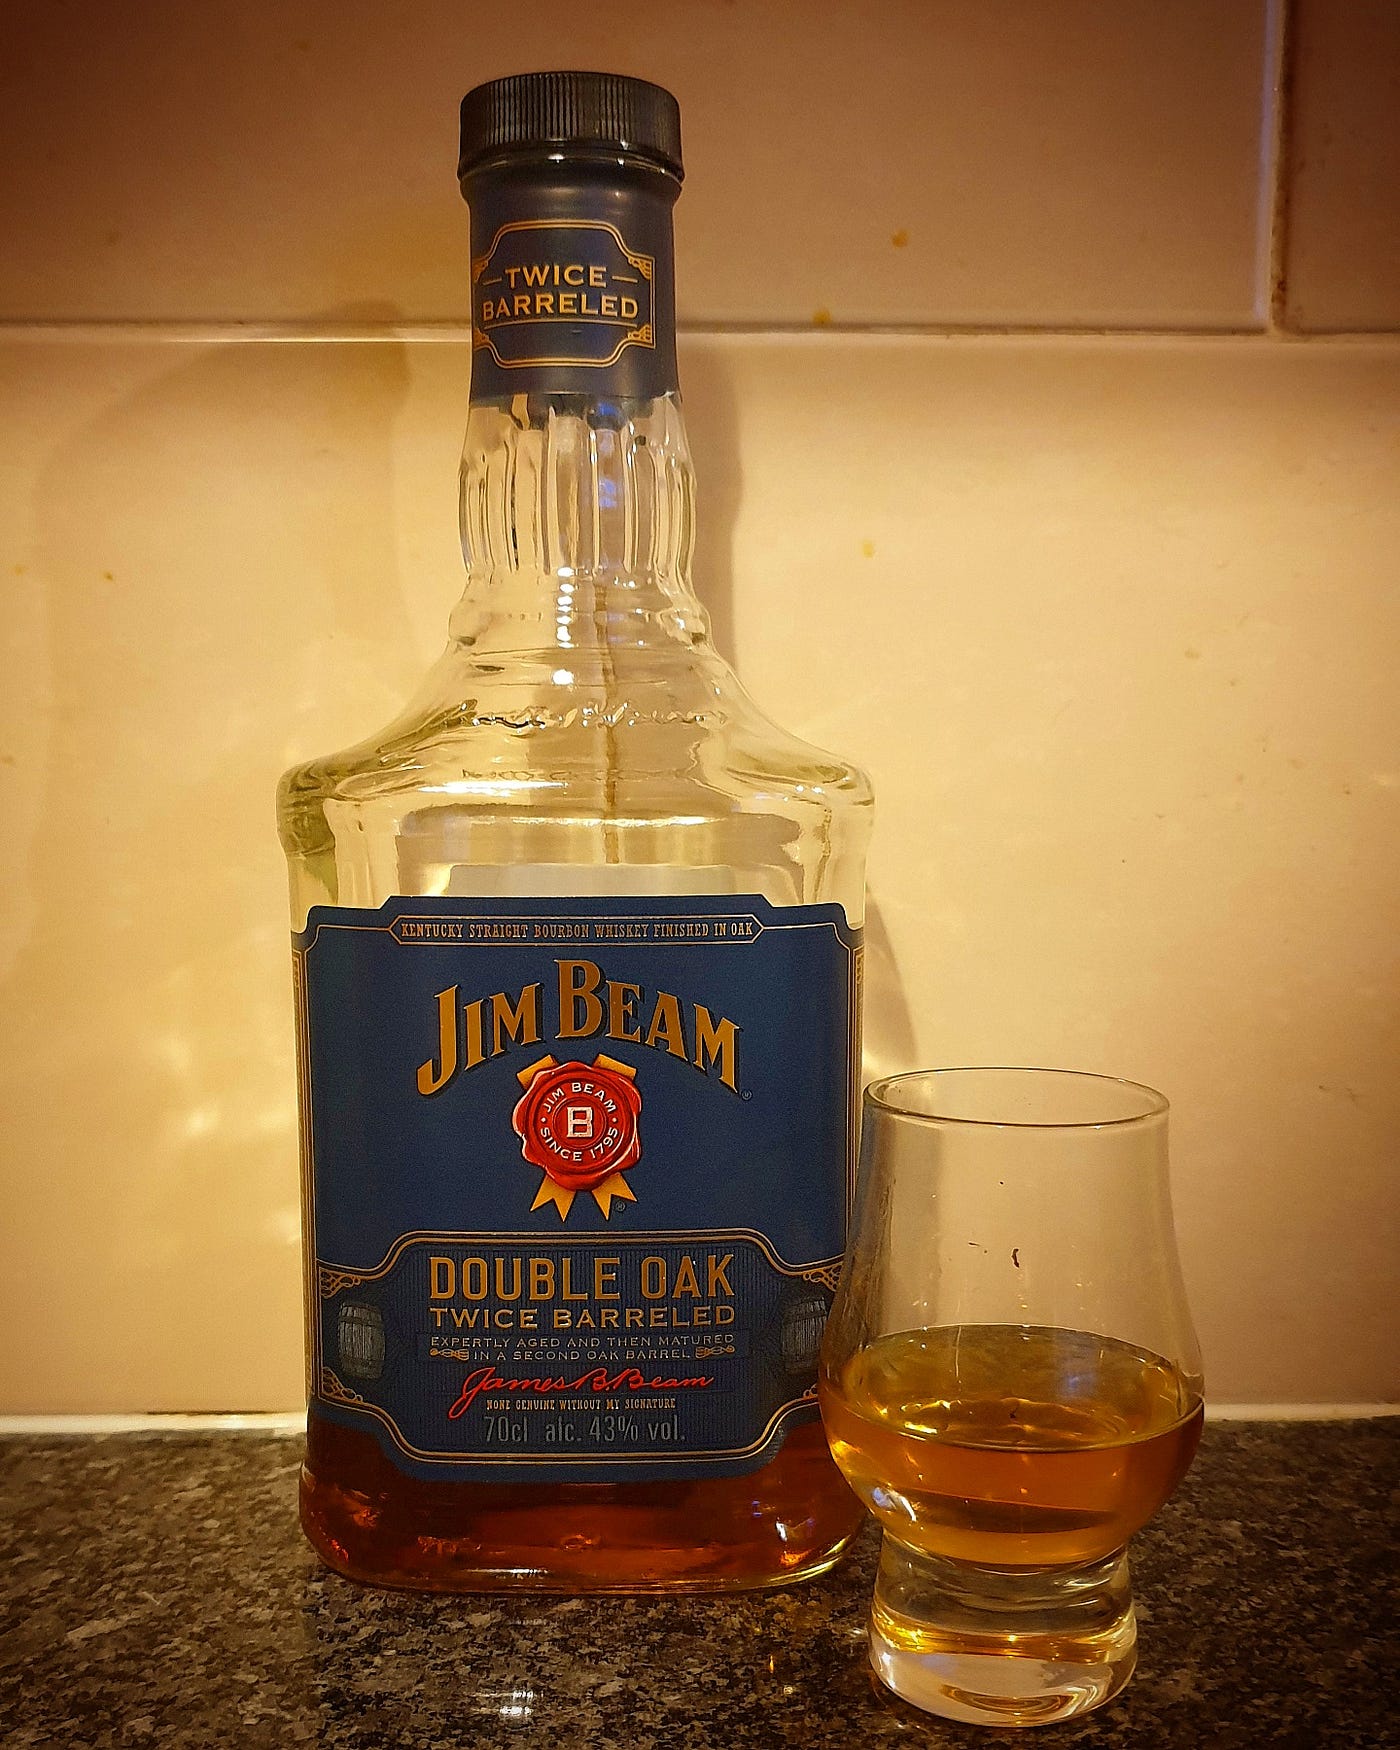 — Beam Whiskey Jim started all | Medium it Where by Oak | Warrior Double